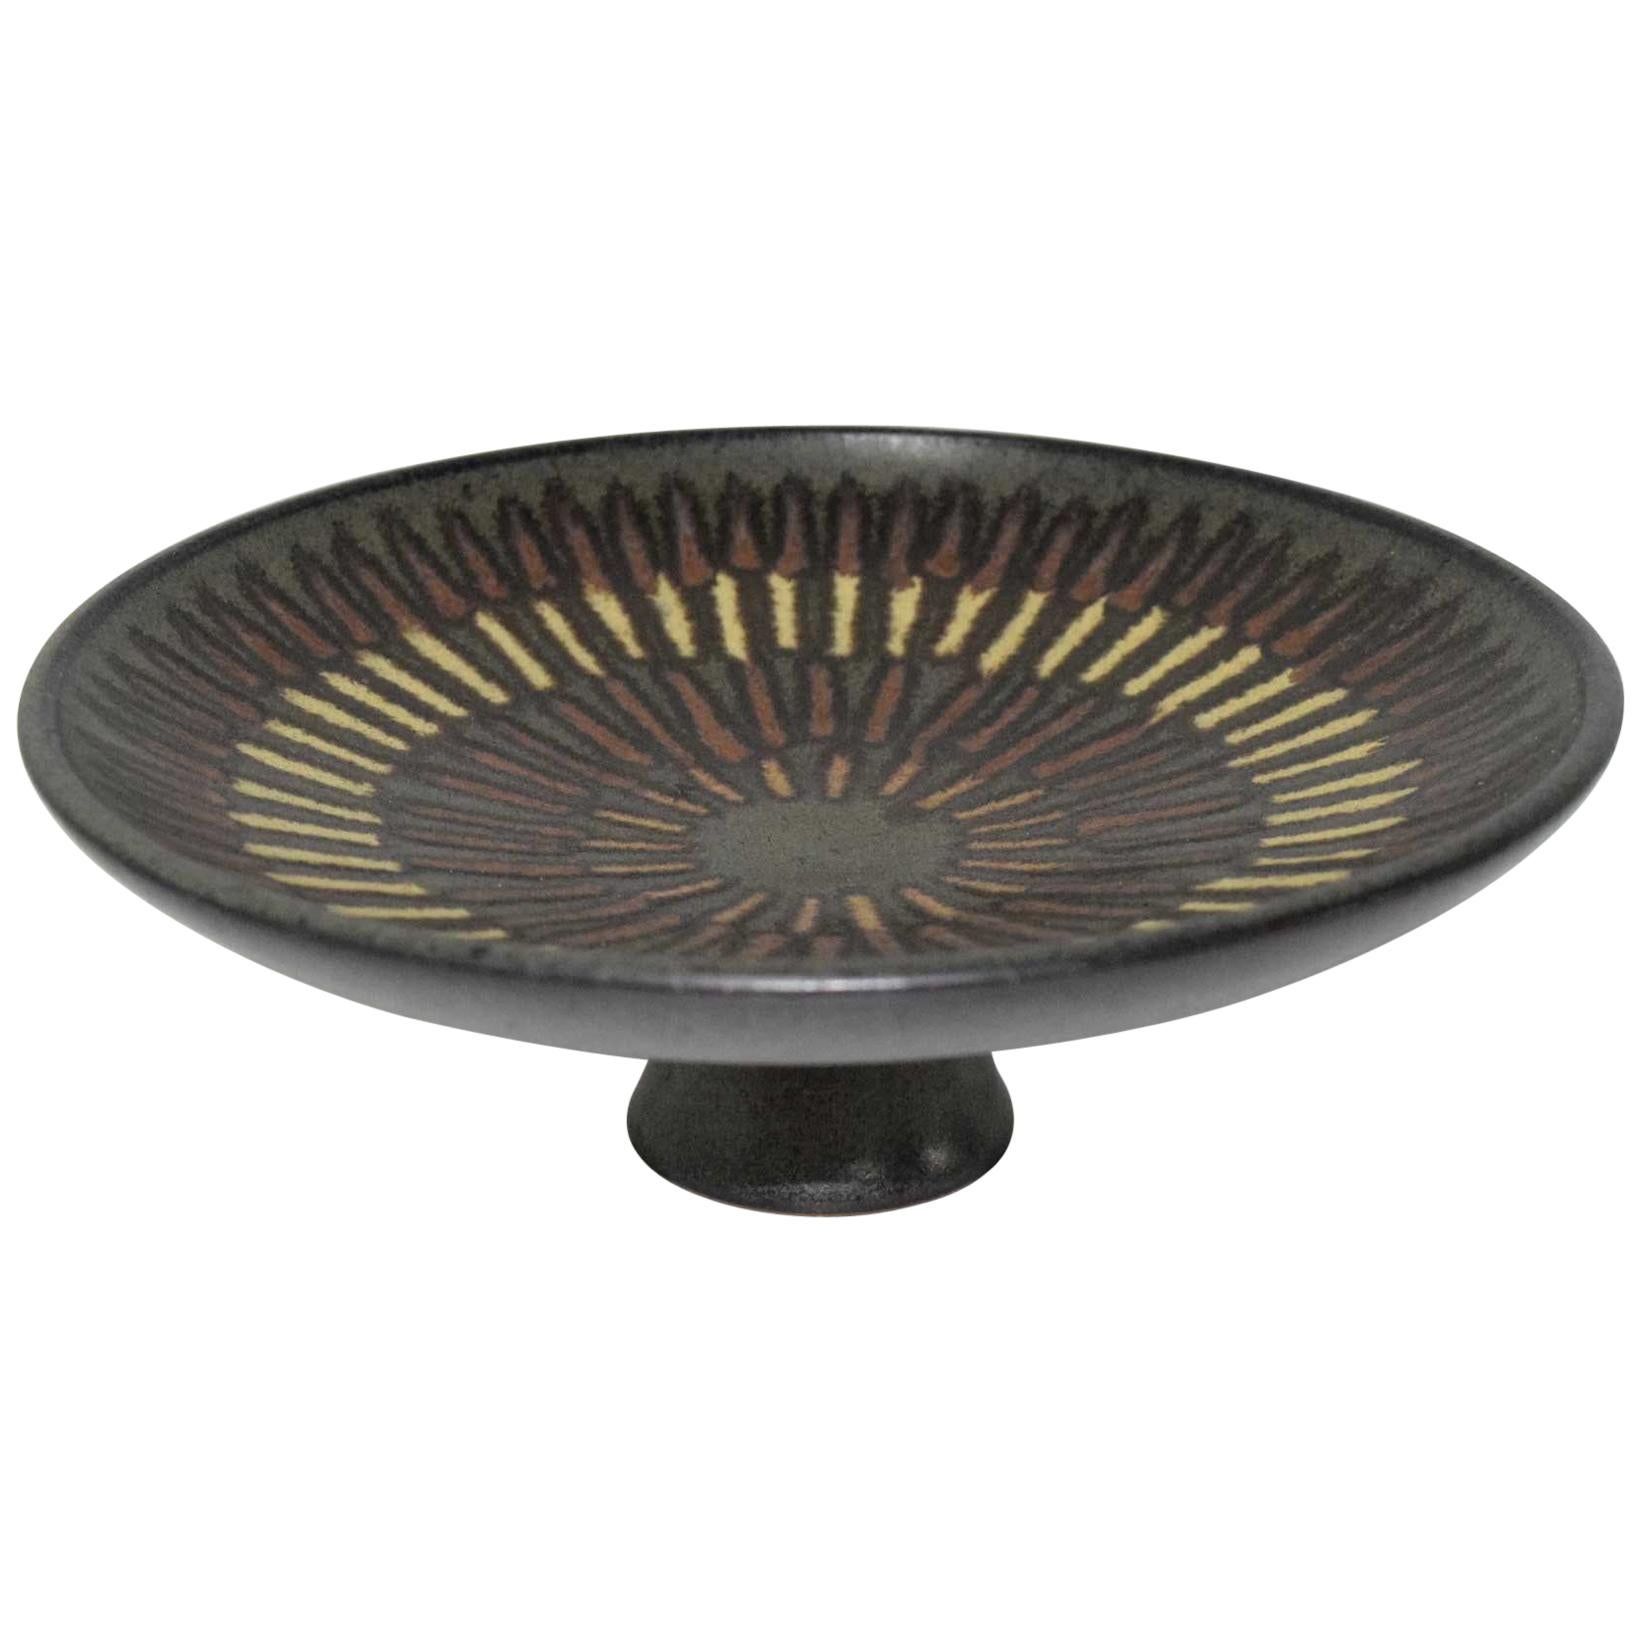 Clyde Burt Footed Tray Plate in Glazed Multicolored Stonewear